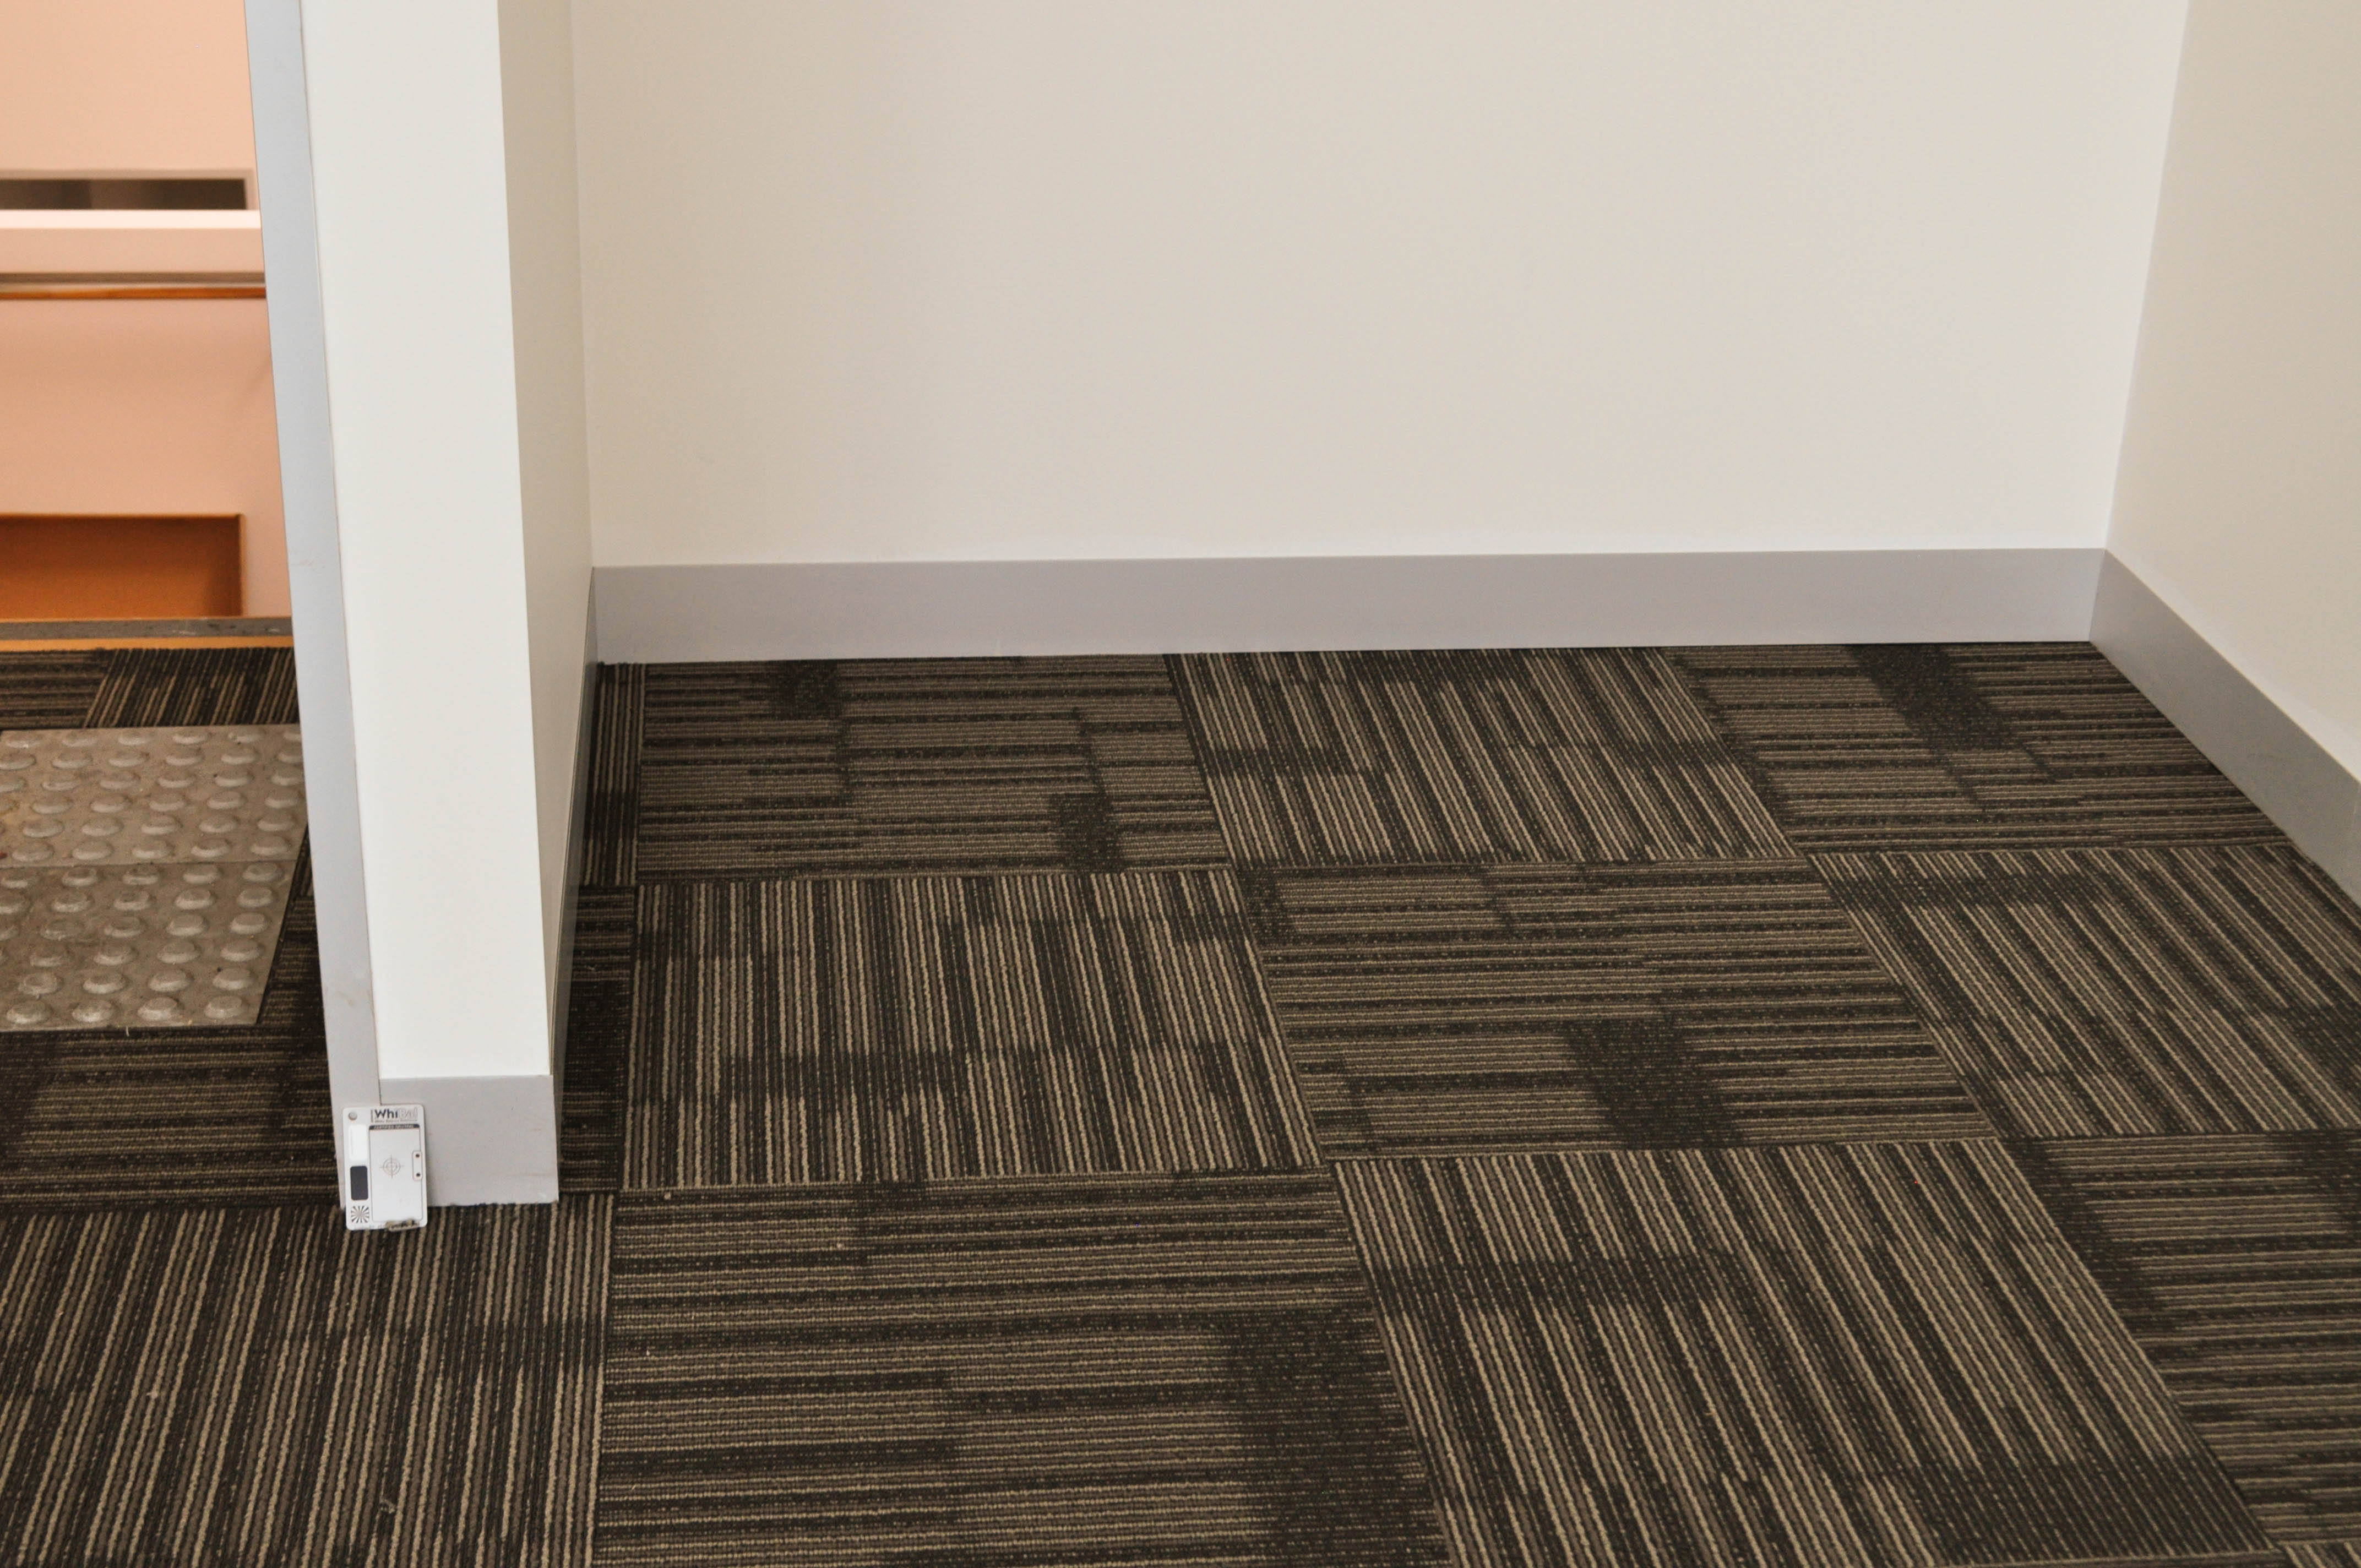 Showing a floor that has a patterned carpet tile installed by Concord Floors on it. The building is in Derrimut.